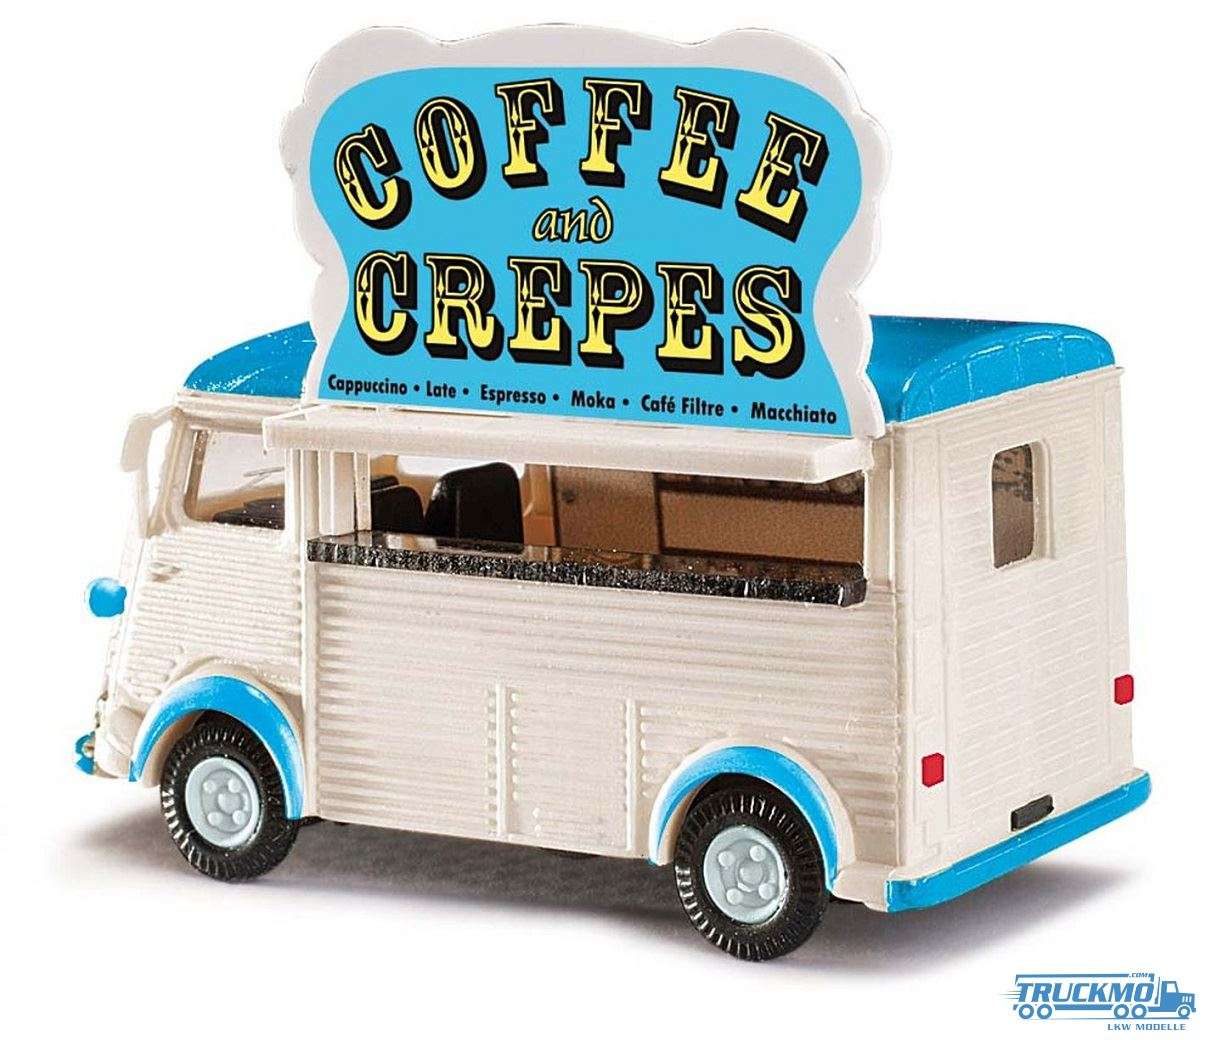 Busch Crepes and Coffee Citroen H mit Girlanden 41926